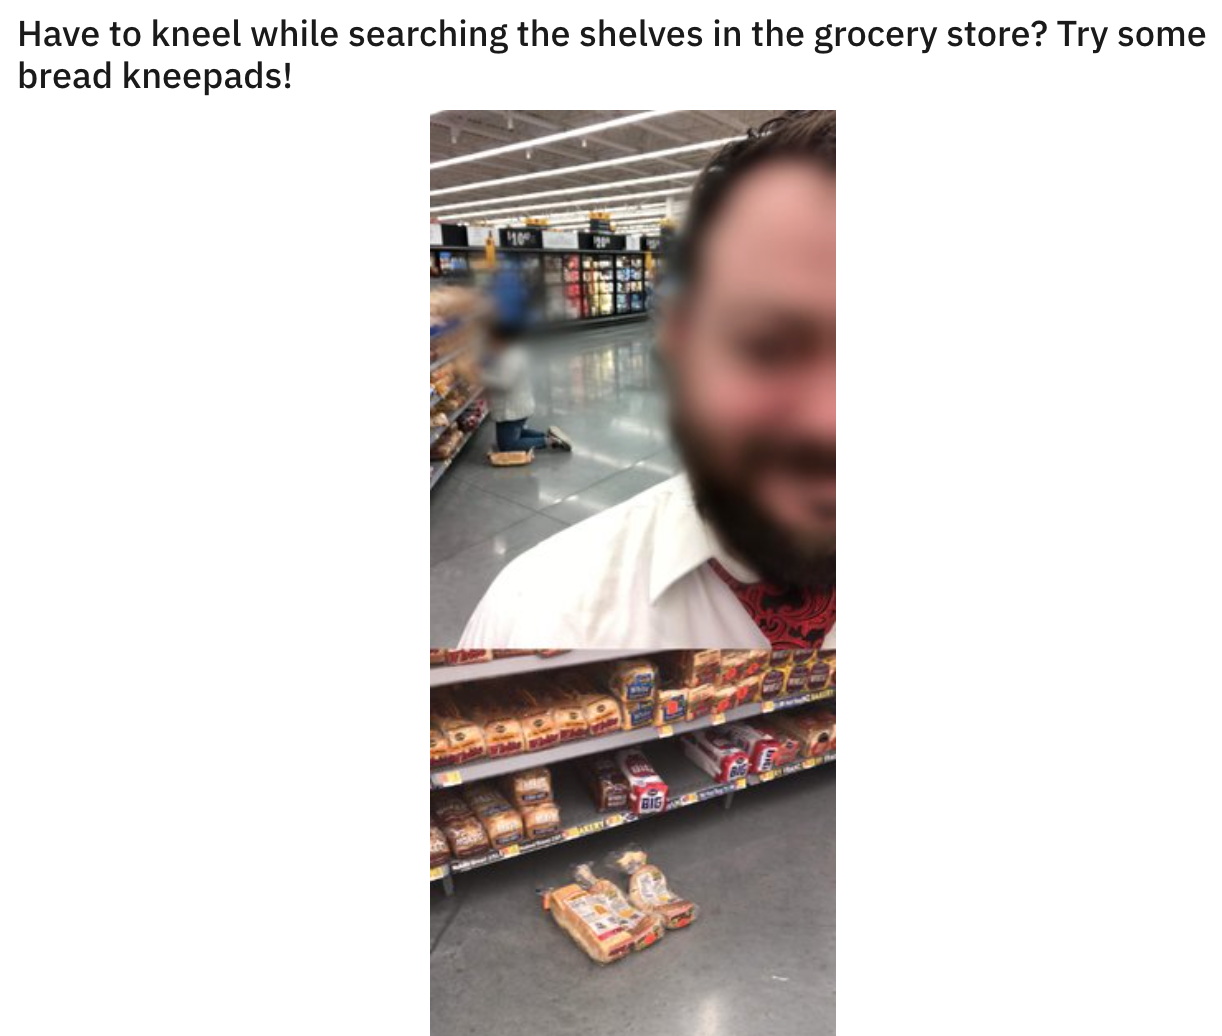 funny dumb life hacks - Have to kneel while searching the shelves in the grocery store? Try some bread kneepads!